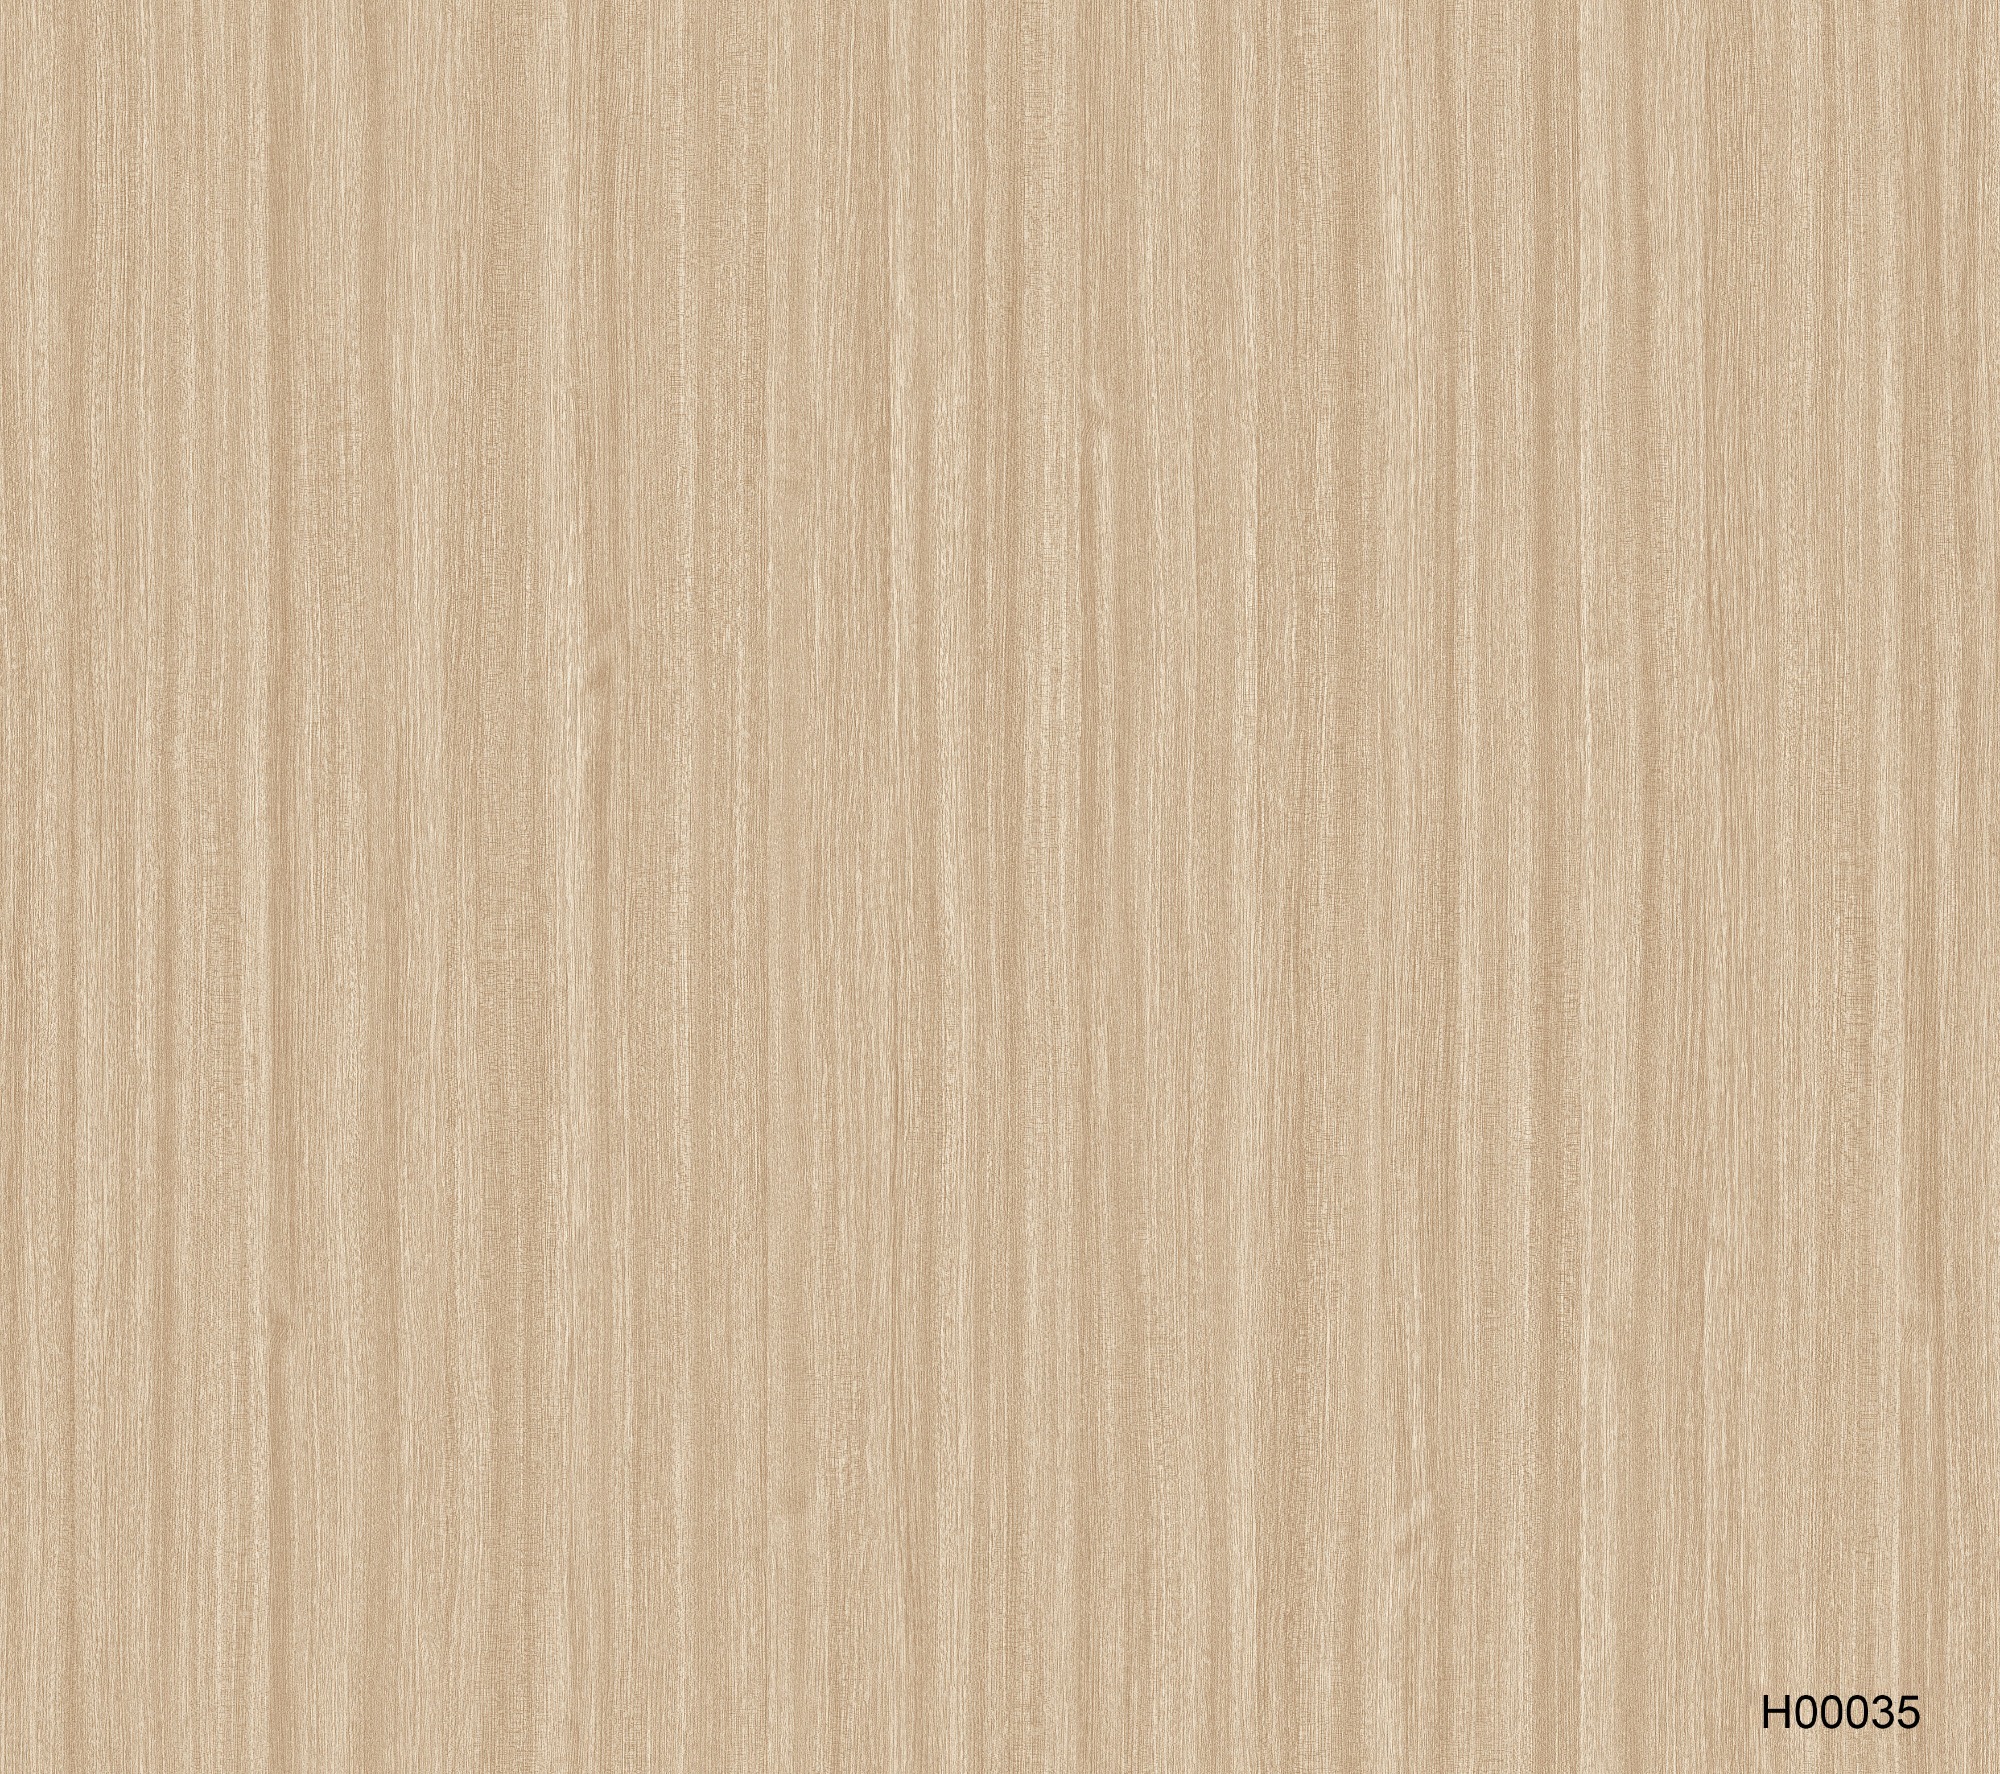 H00035 Melamine paper with wood grain